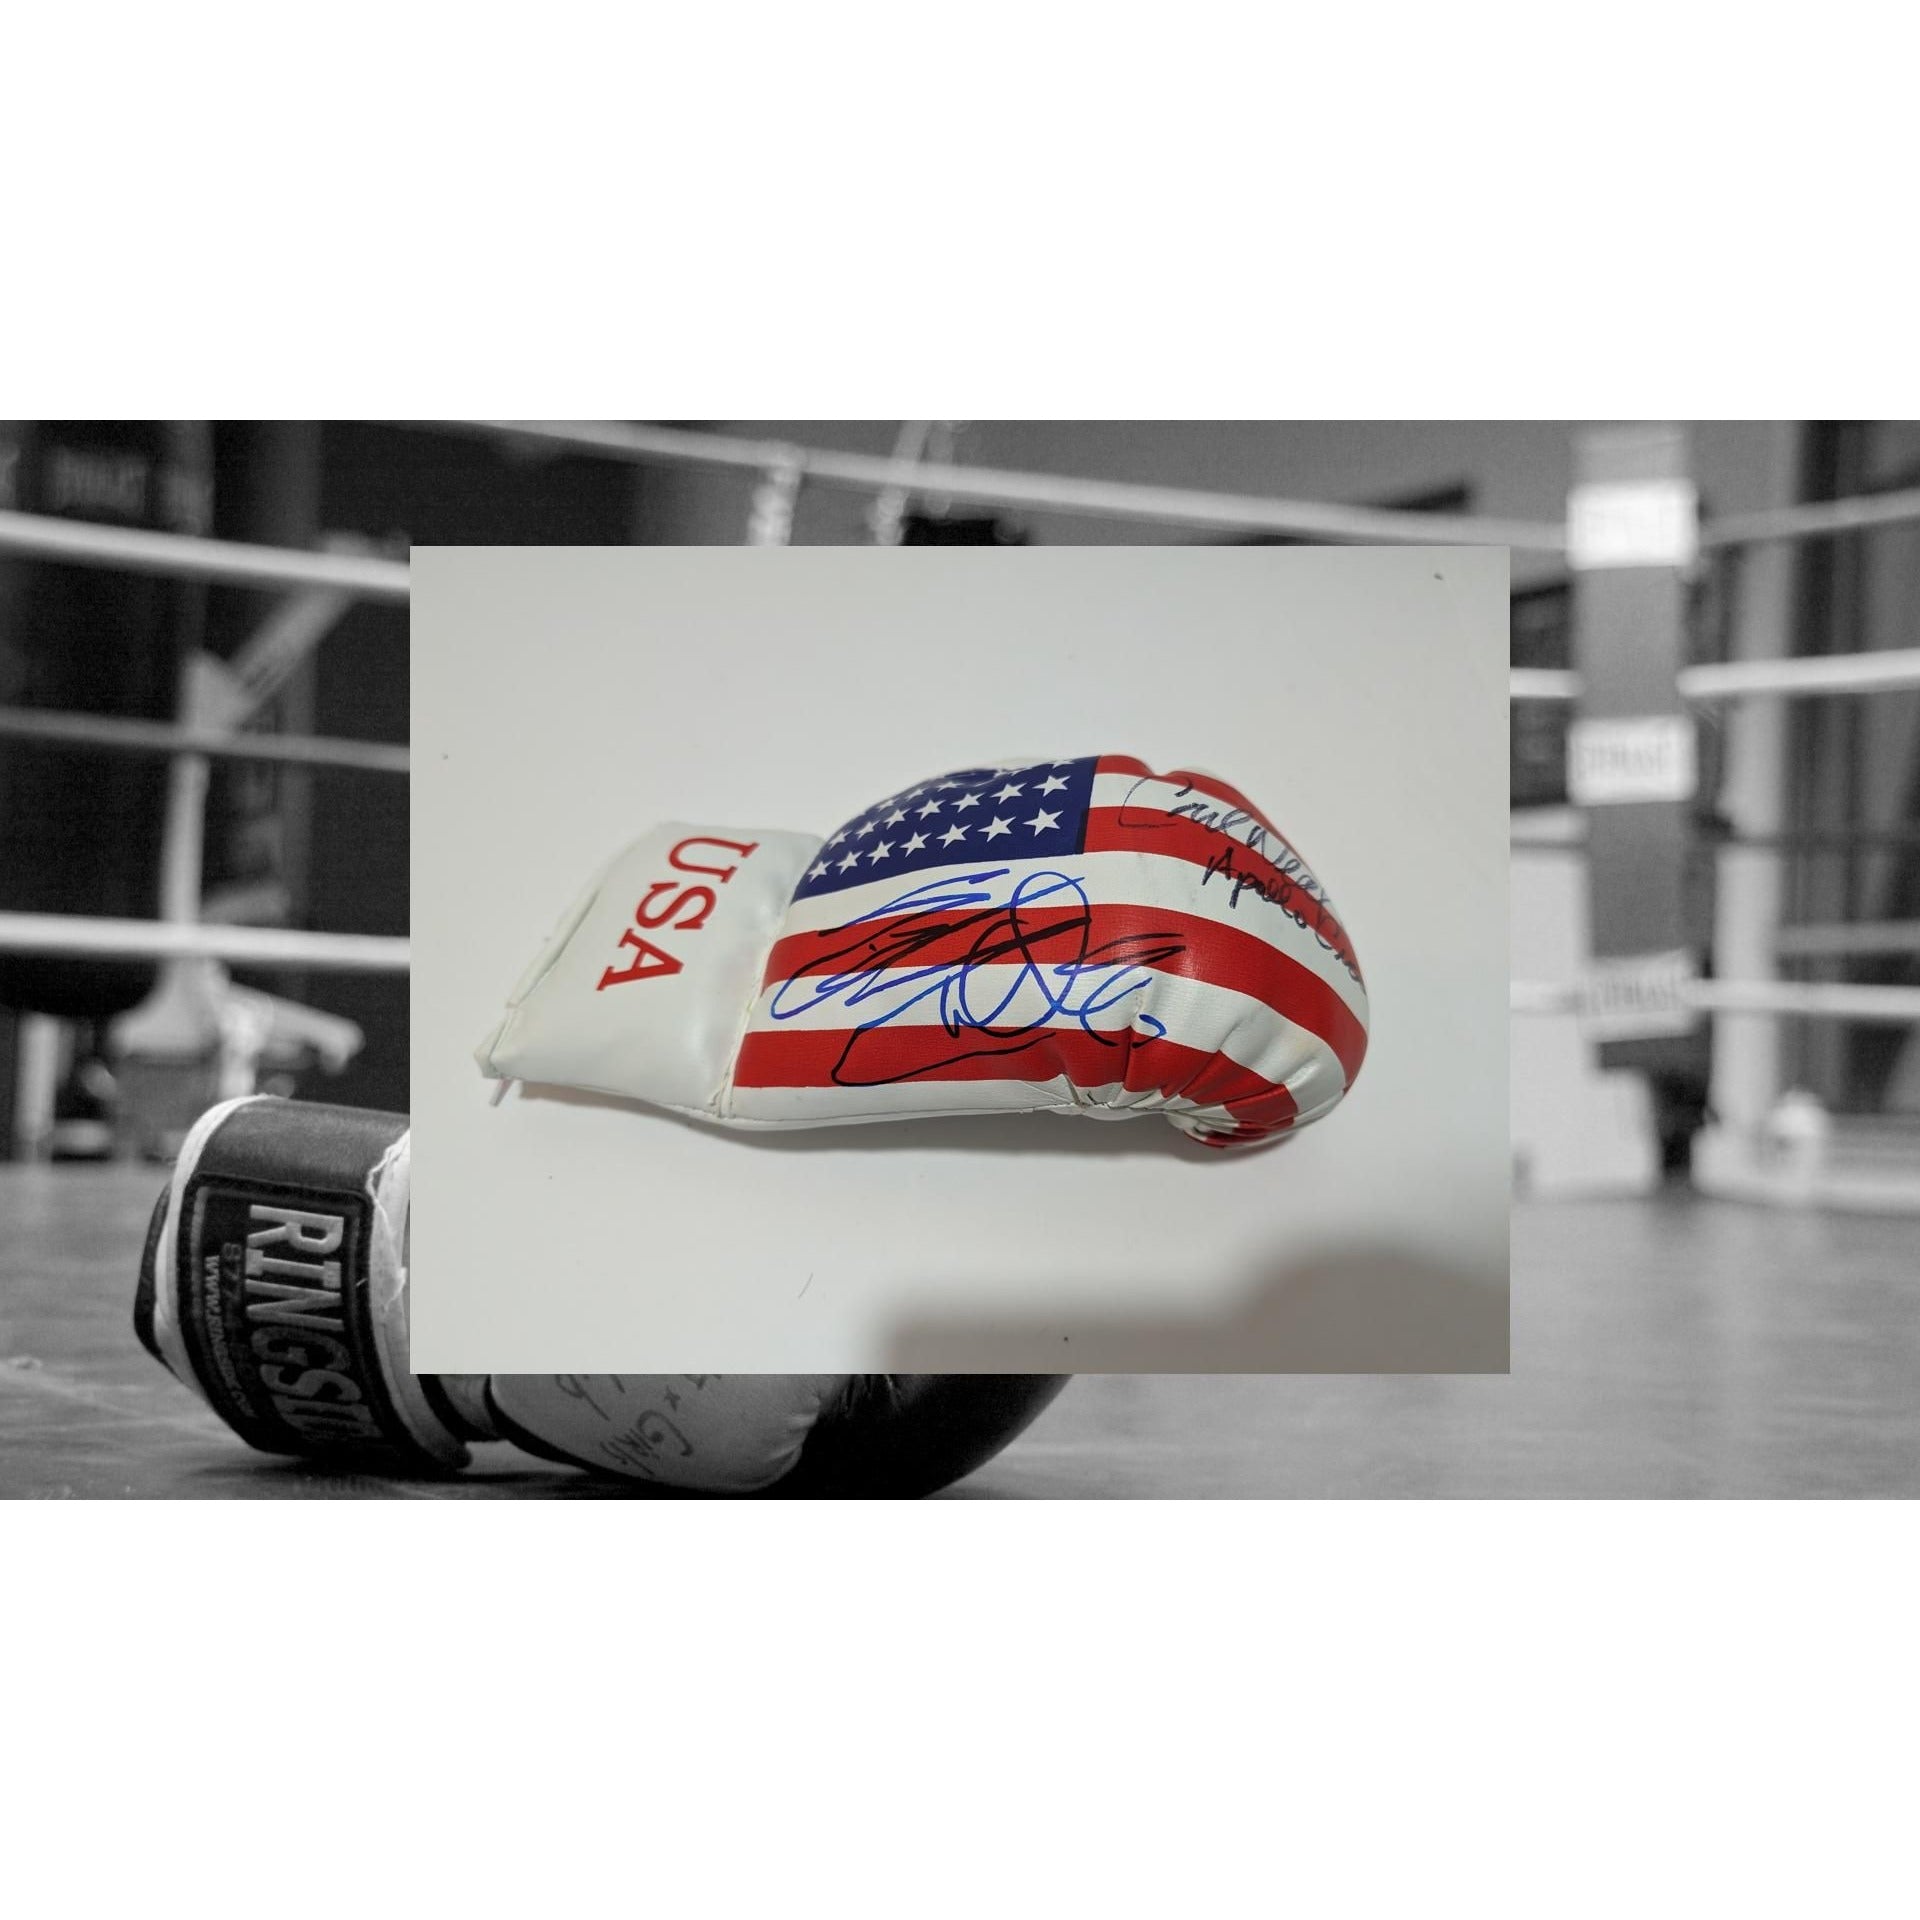 Sylvester Stallone Rocky Balboa and Carl Weathers Apollo Creed USA boxing gloves signed with proof